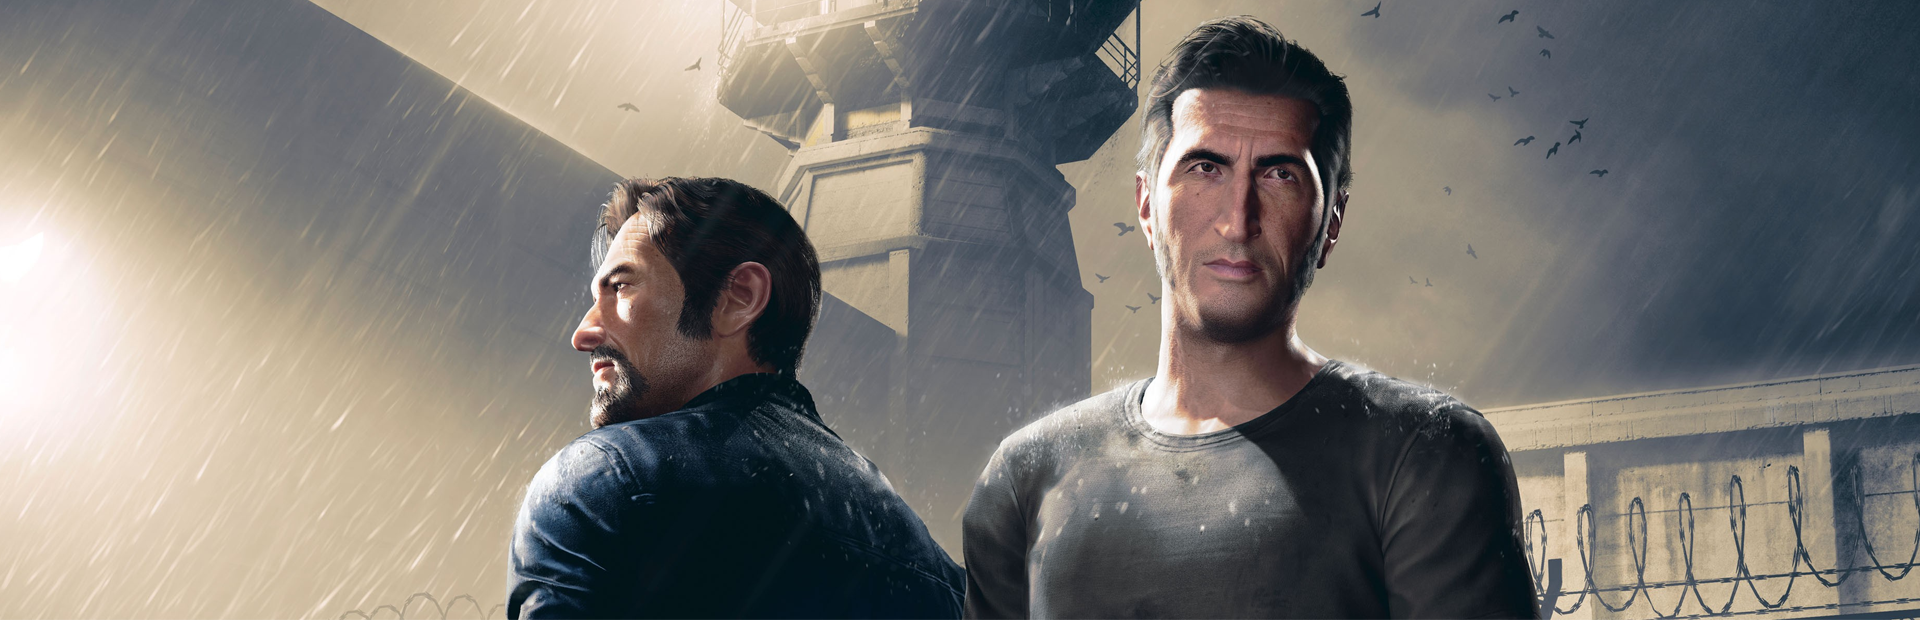 A way out Лео. A way out ps4. A way out персонажи. Away out игра. Out whether